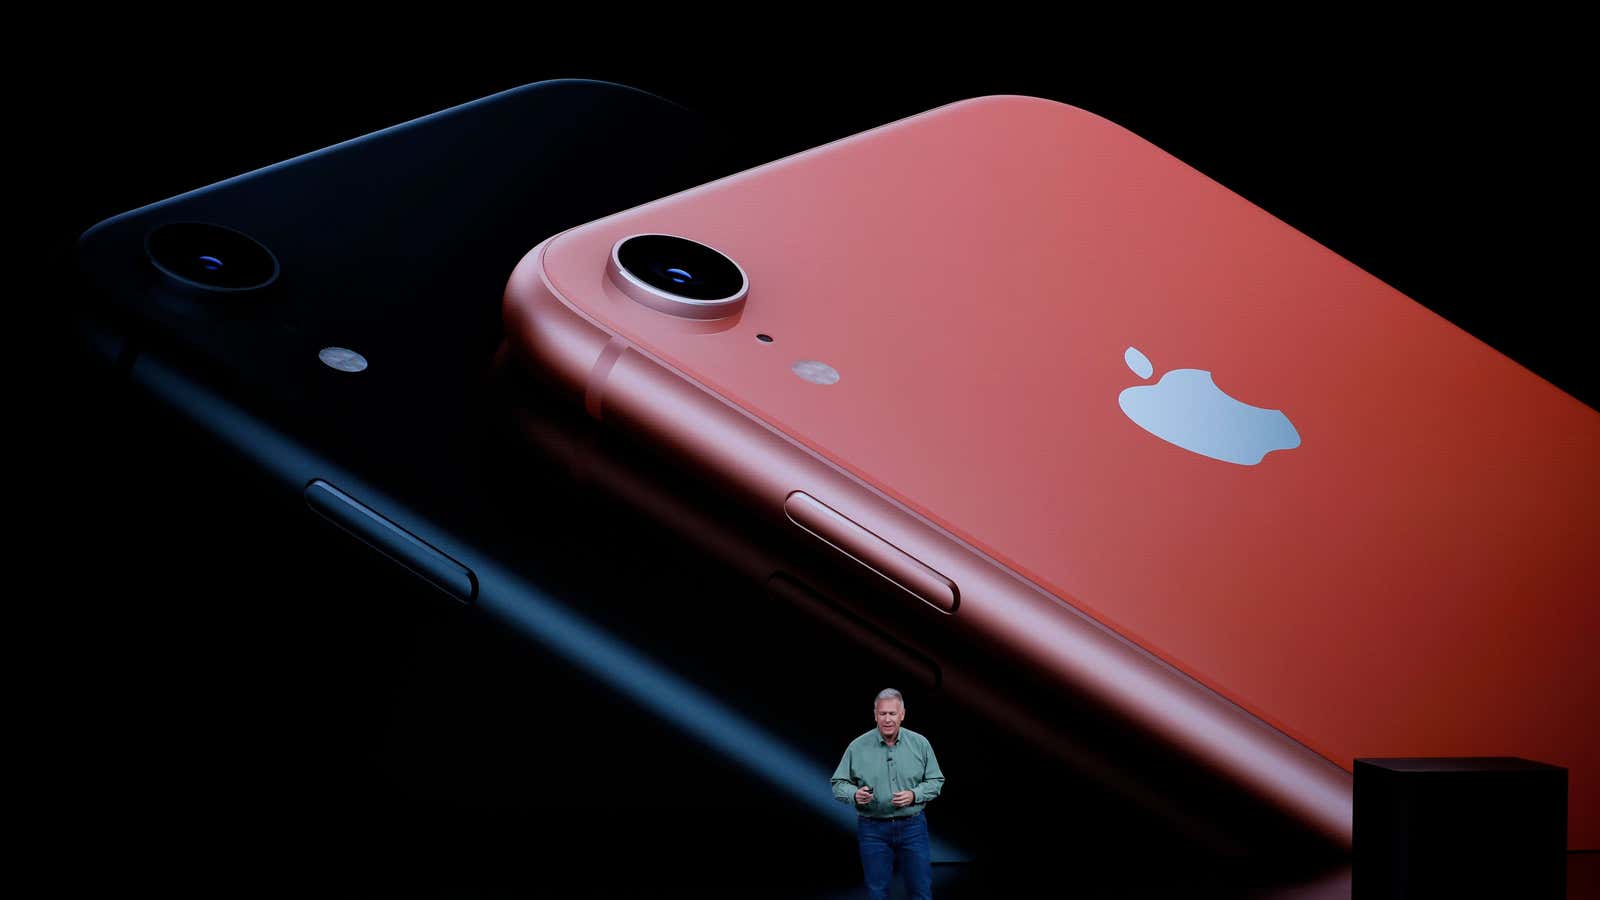 The iPhone XR is $250 cheaper than the XS, and reviewers didn’t particularly miss the premium features it lacks.